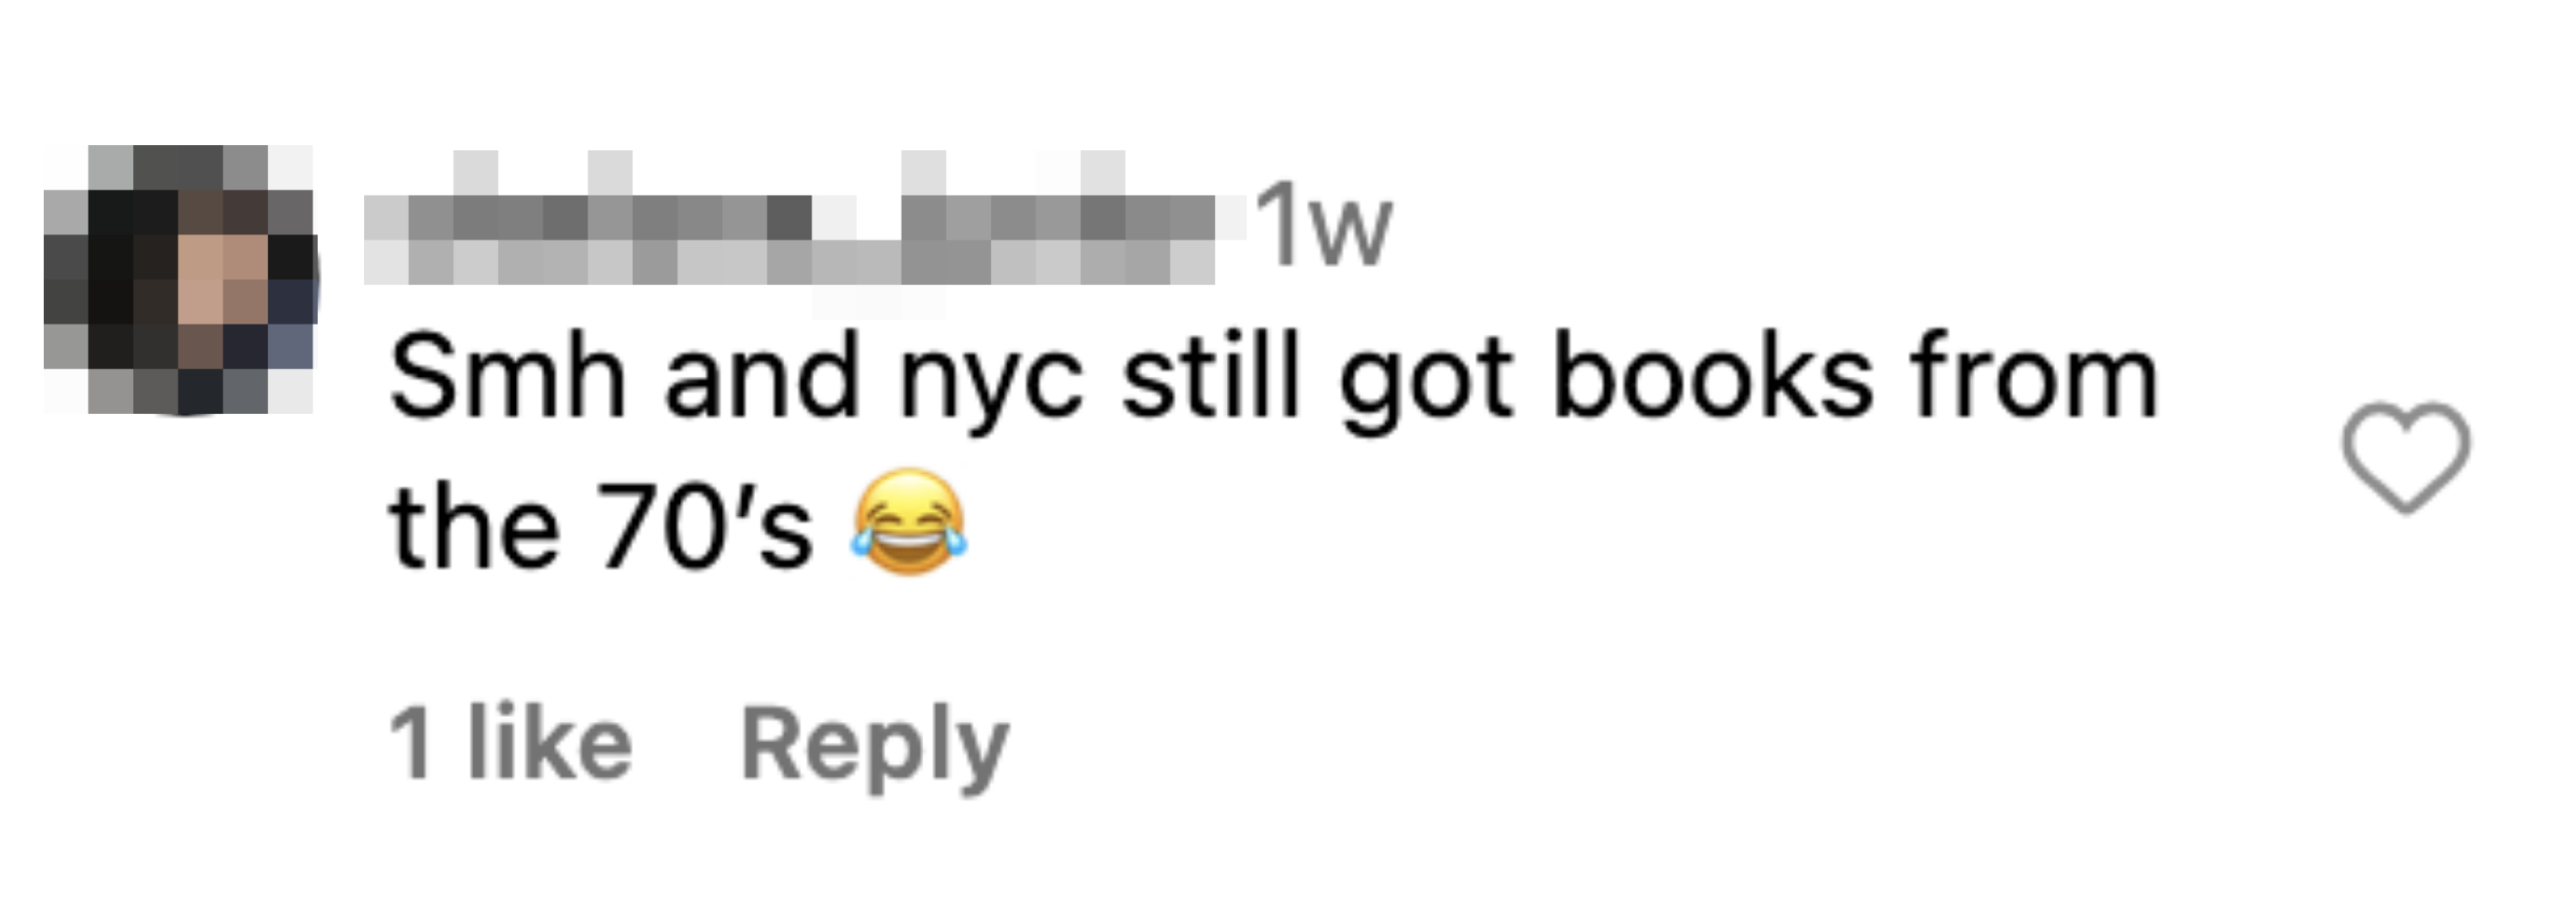 &quot;Smh and NYC still got books from the 70s.&quot;